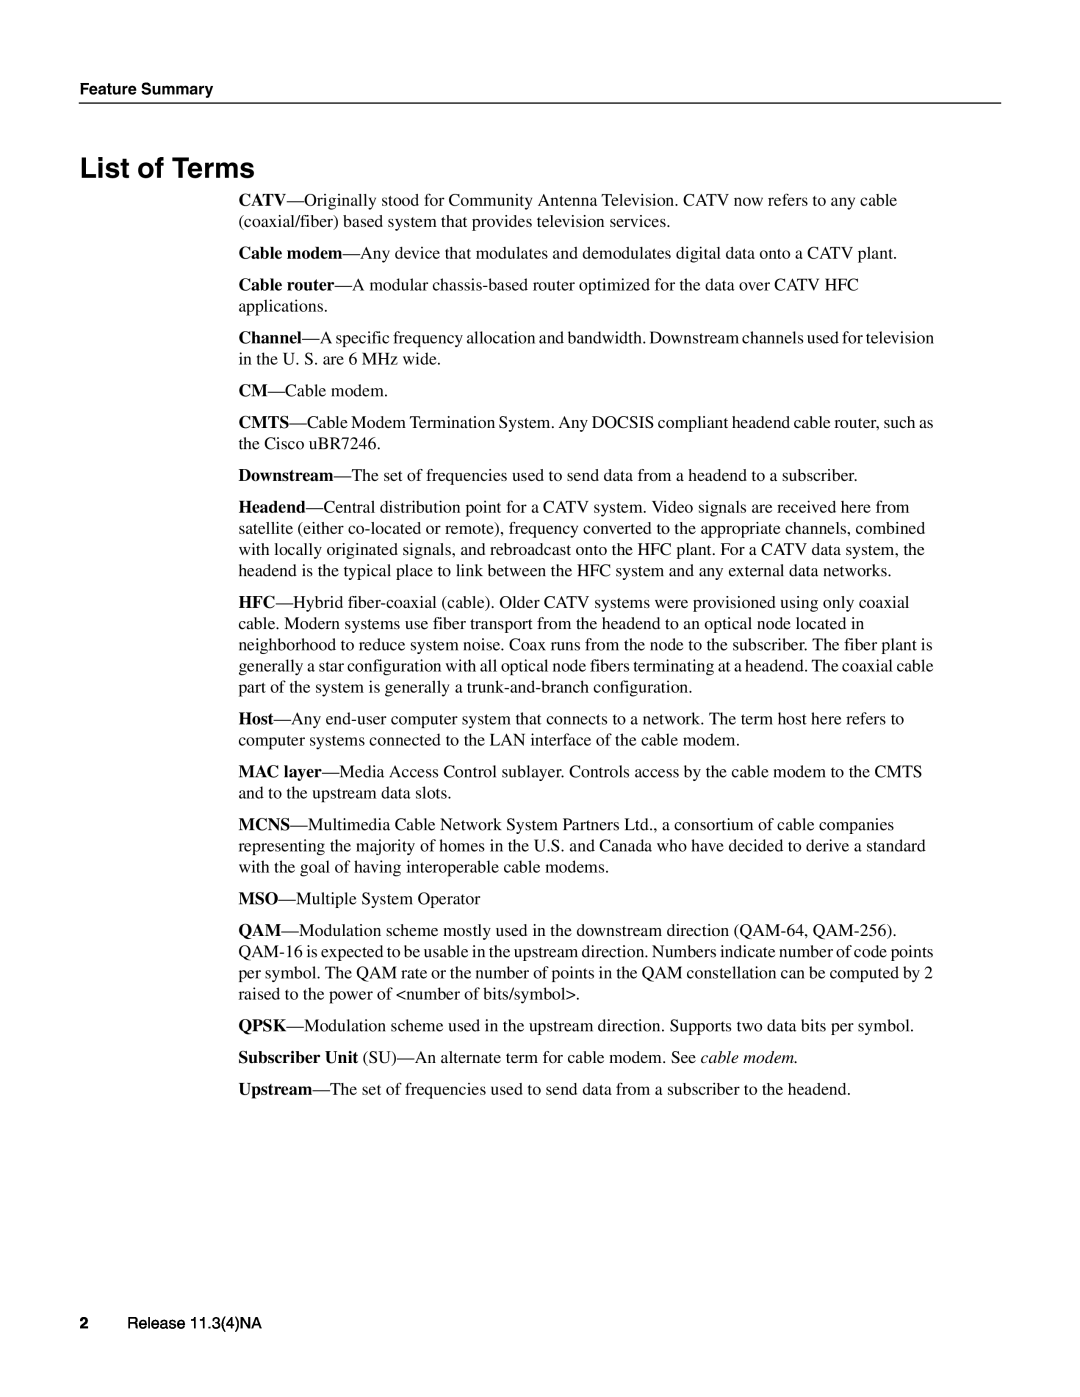 Cisco Systems UBR904 manual List of Terms 